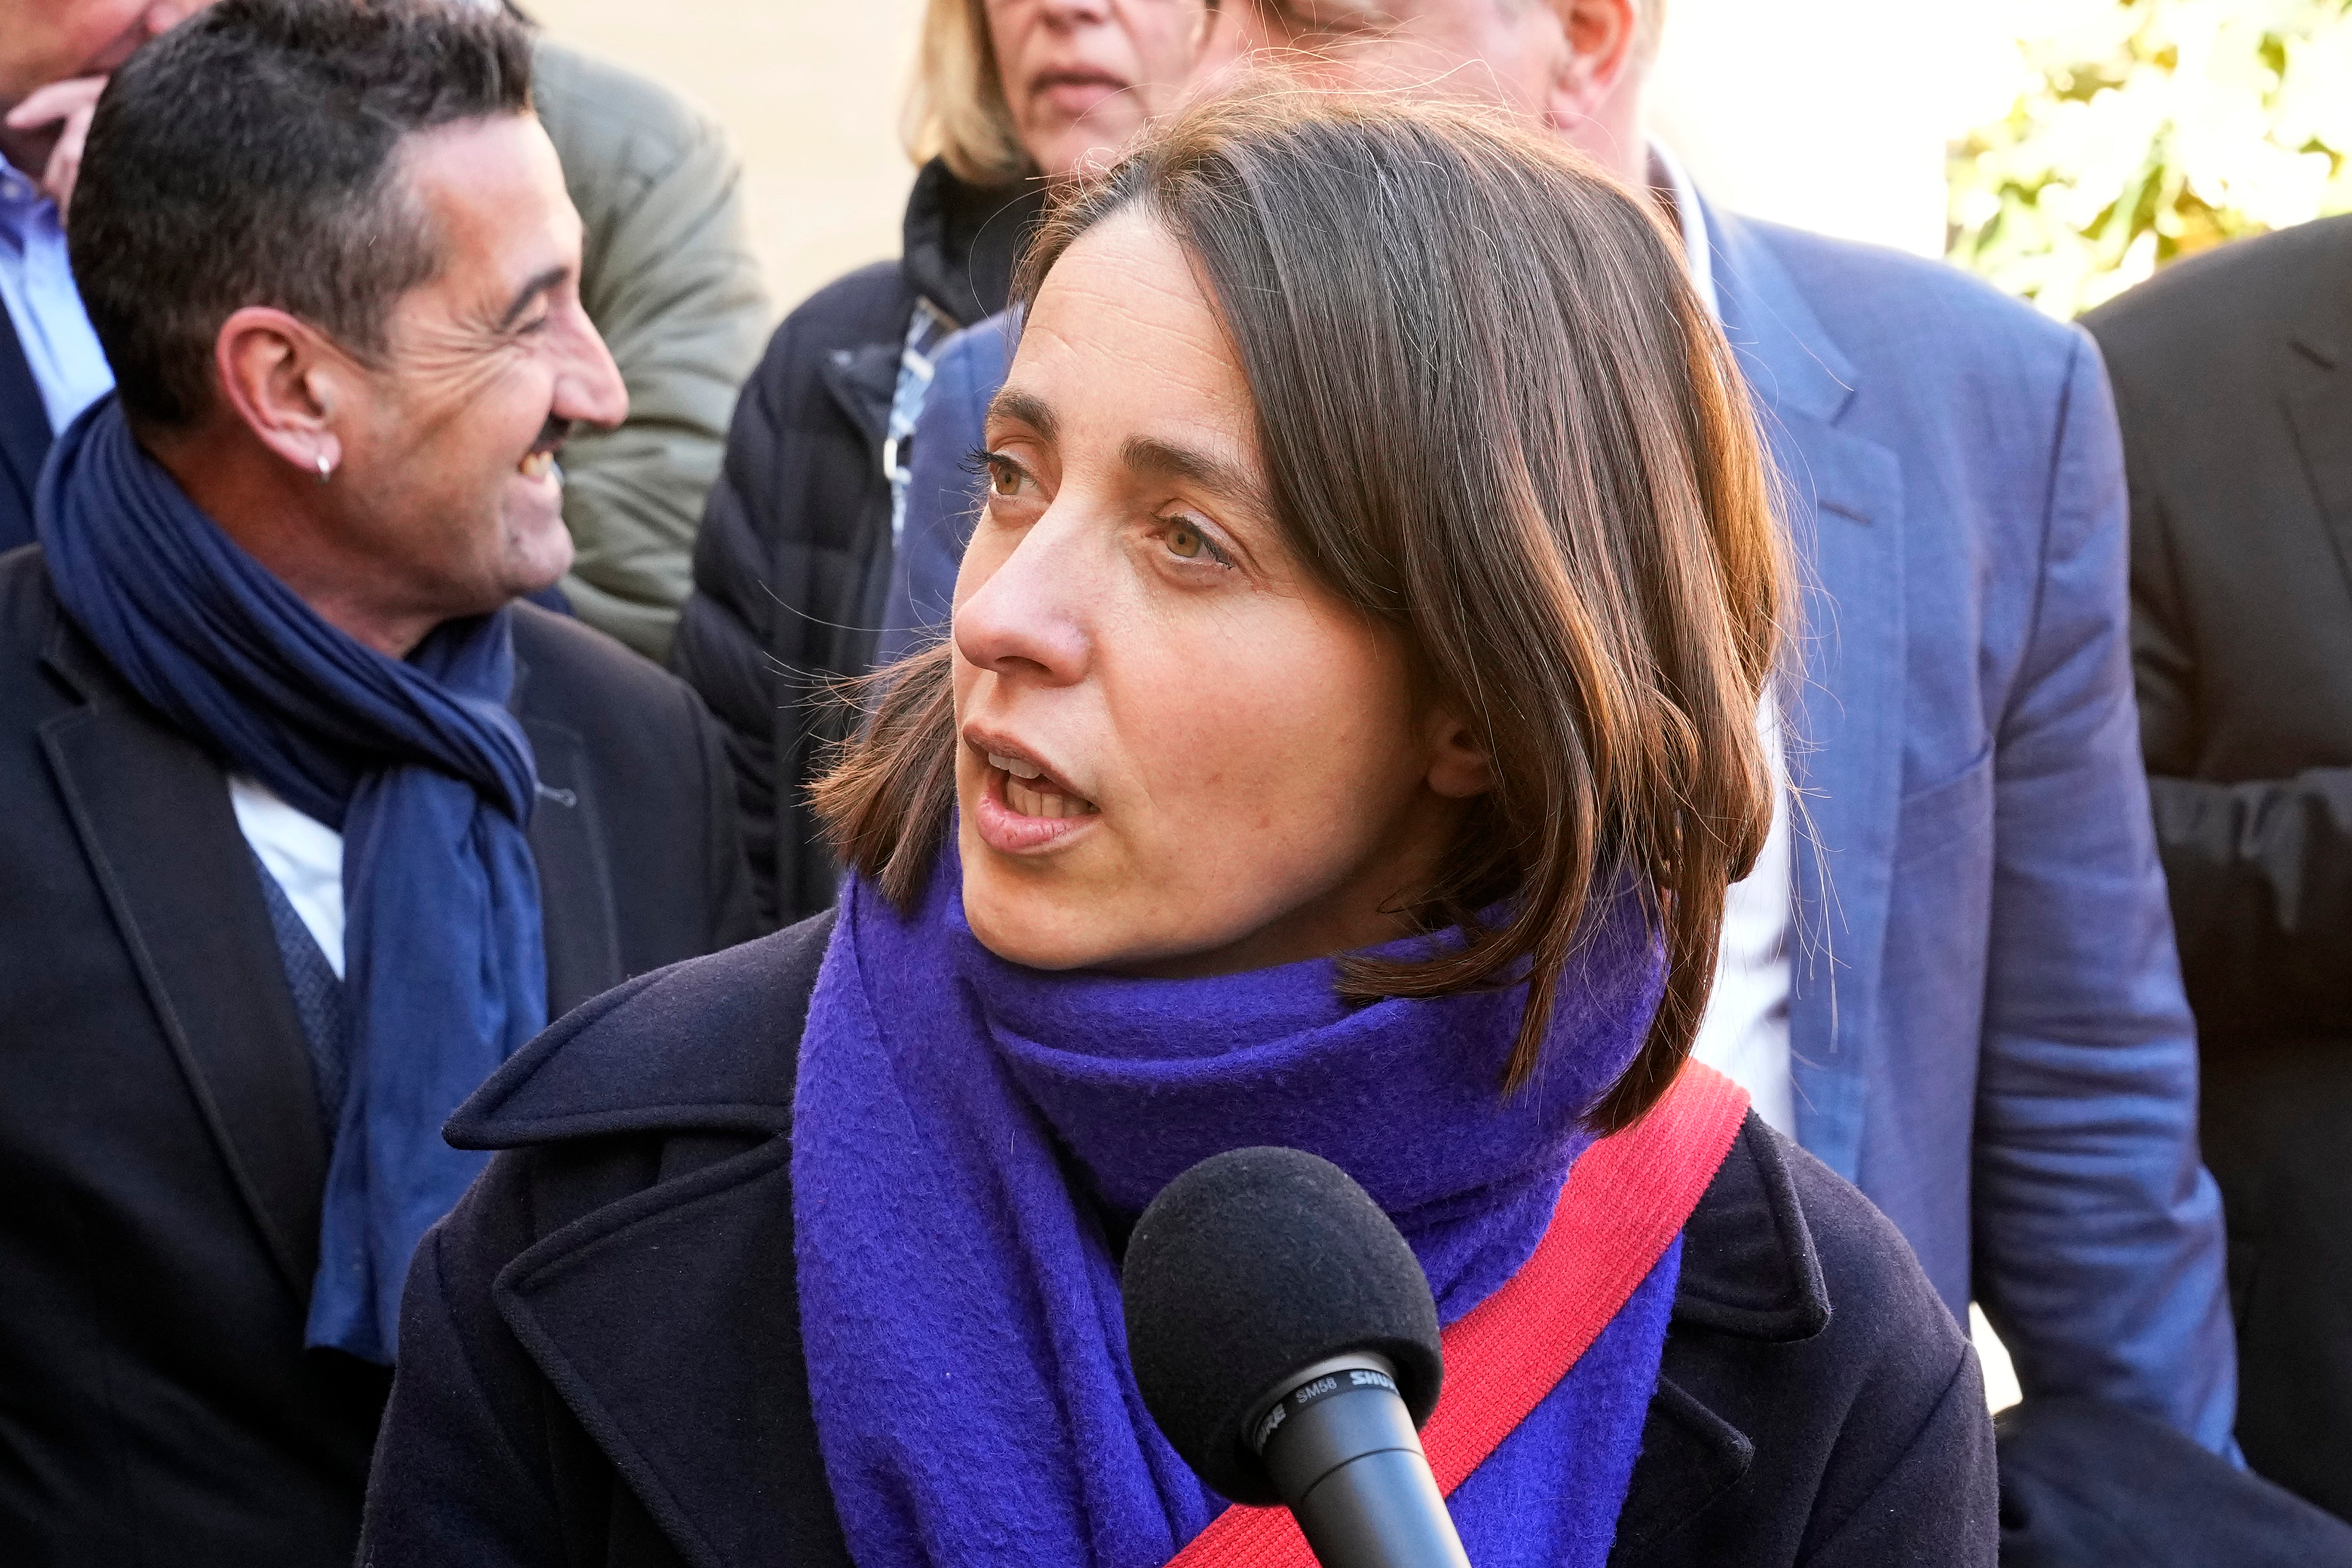 Sophie Binet, leader of the CGT union